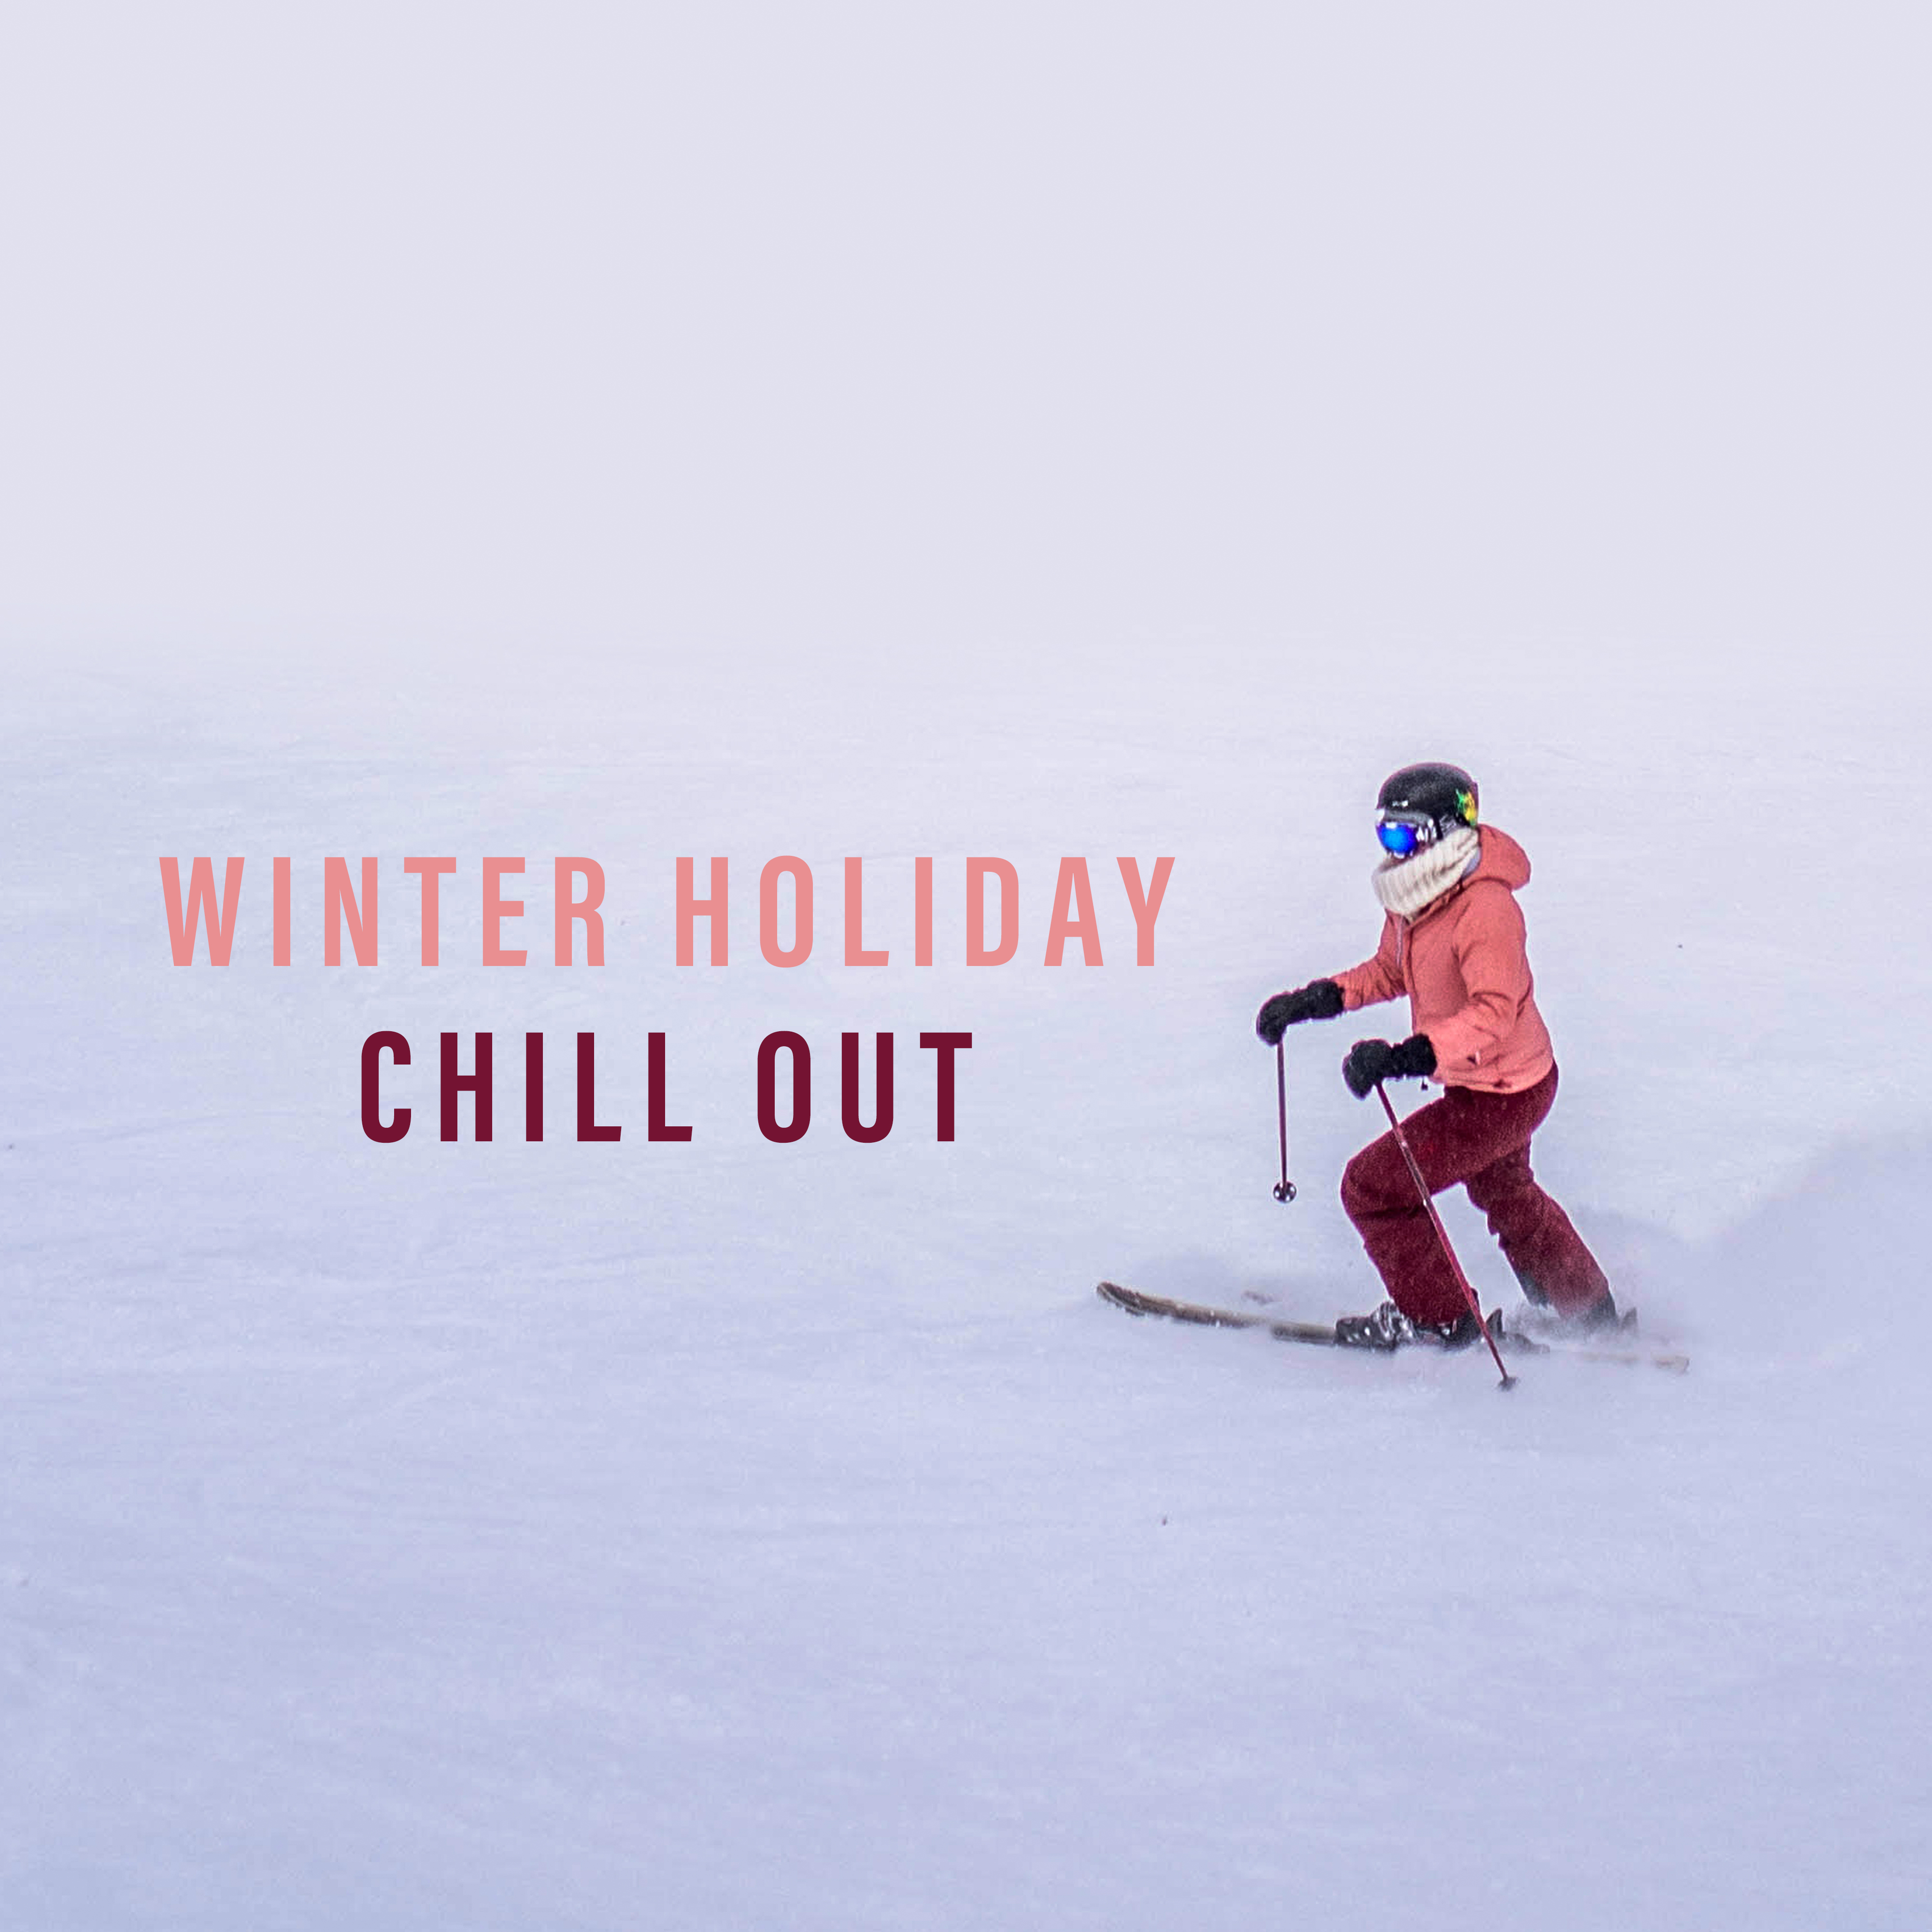 Winter Holiday Chill Out